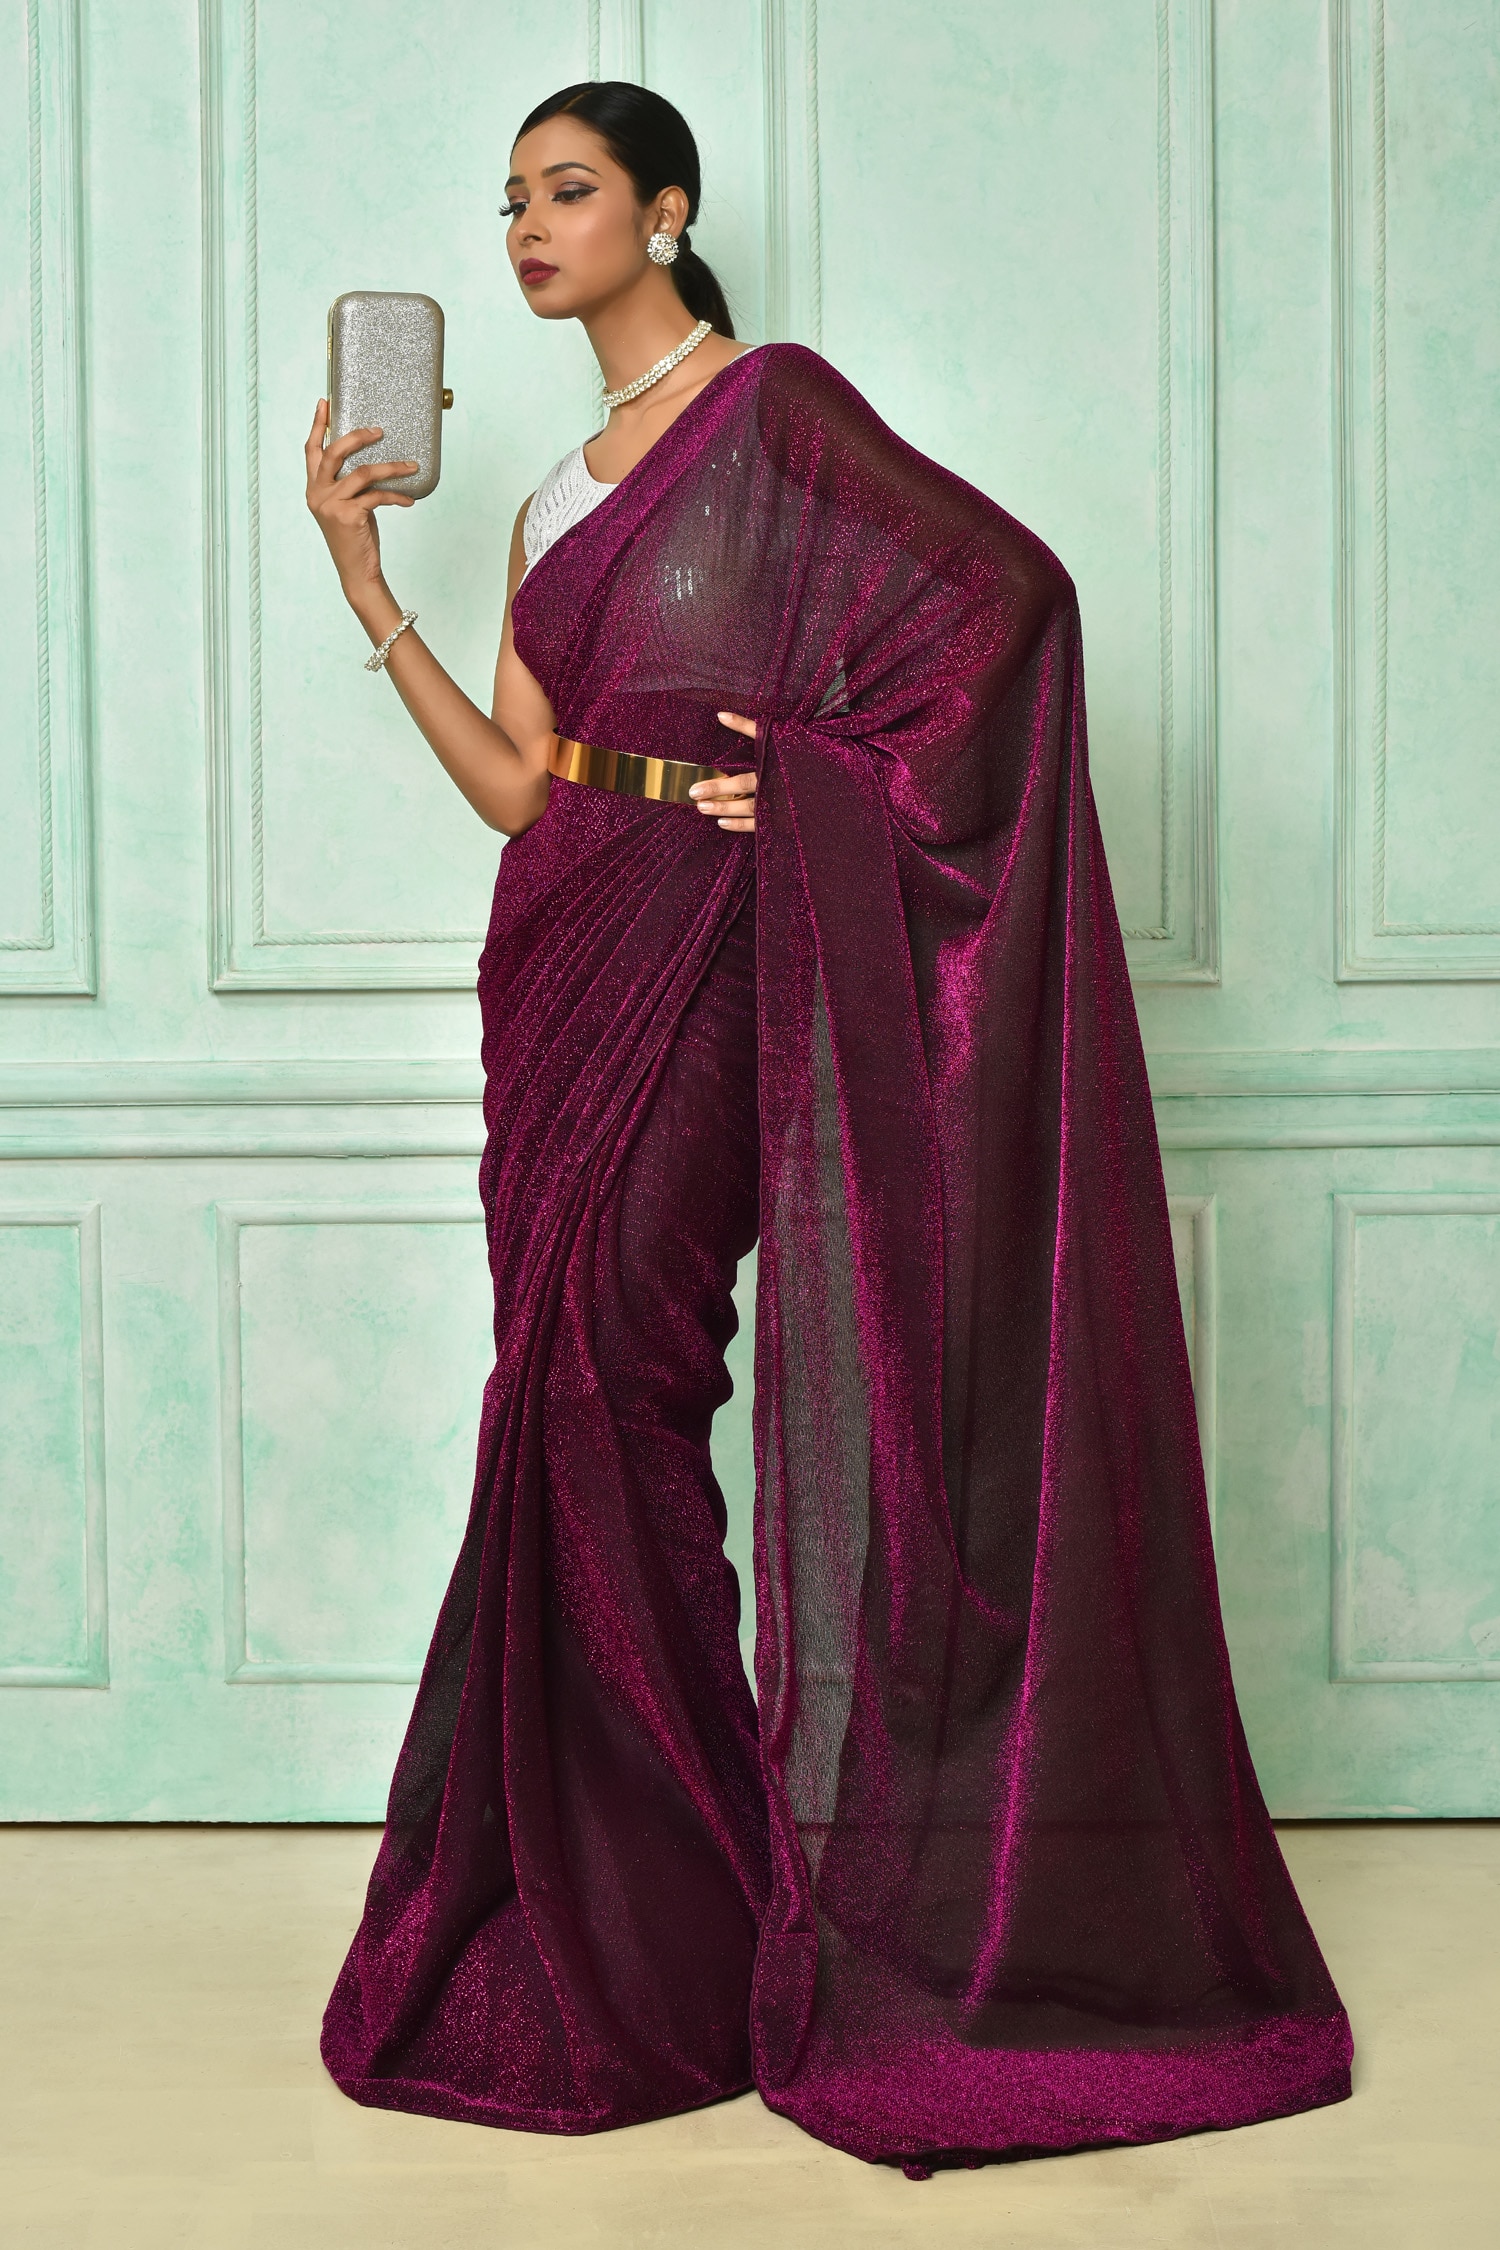 Adara Khan Purple Saree: Heavy Netting Woven Shimmer With Running Blouse For Women